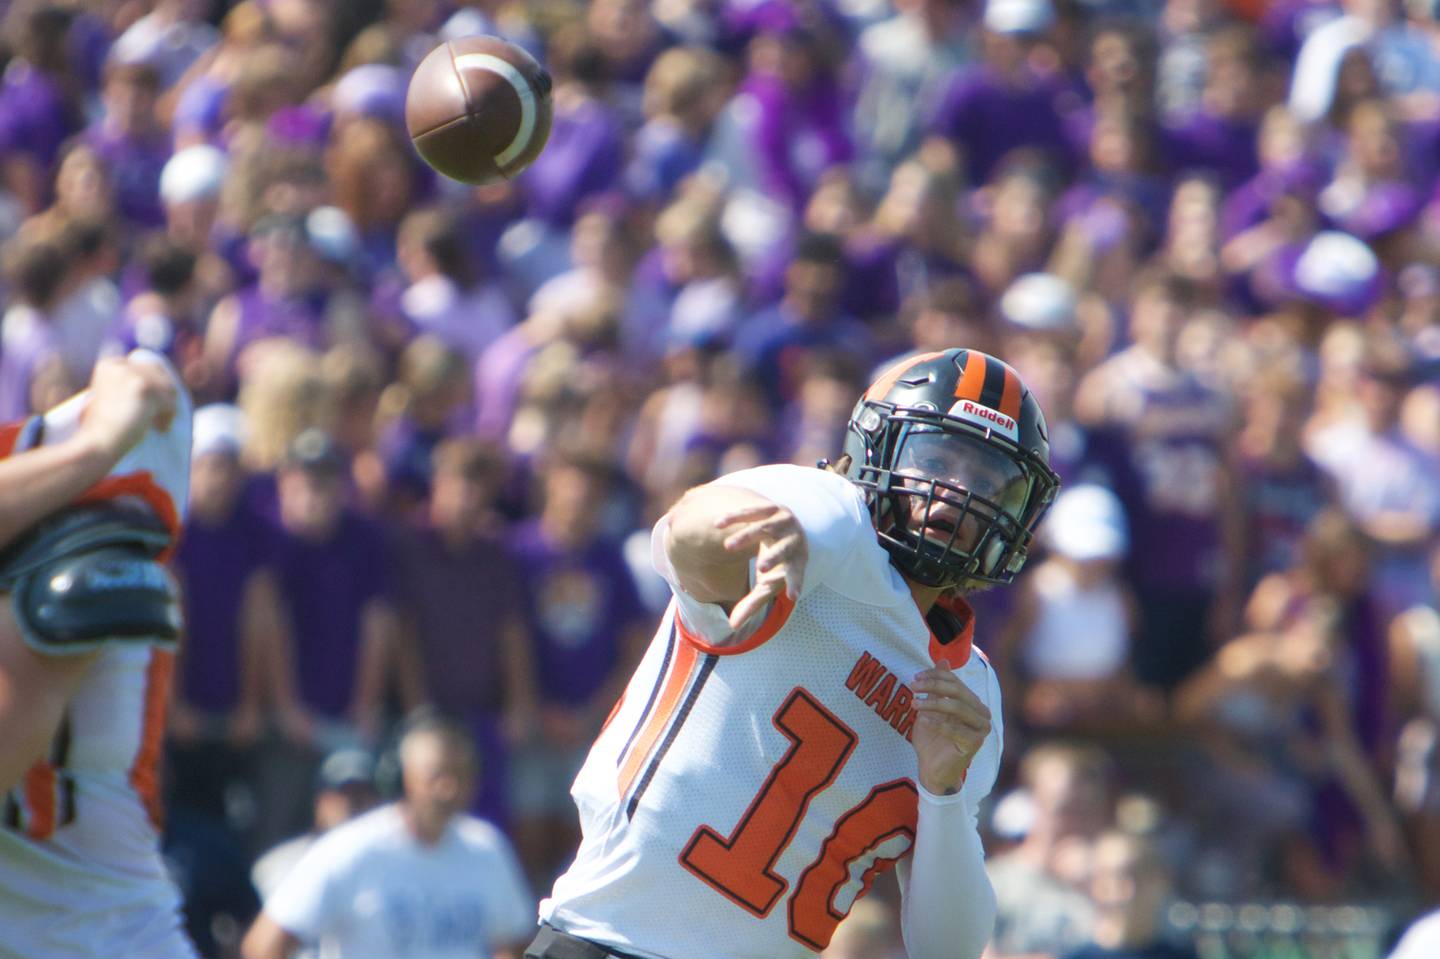 McHenry's Dominick Caruso throws for a gain against Gary - Grove on Saturday, Sept. 17,2022 in Cary.